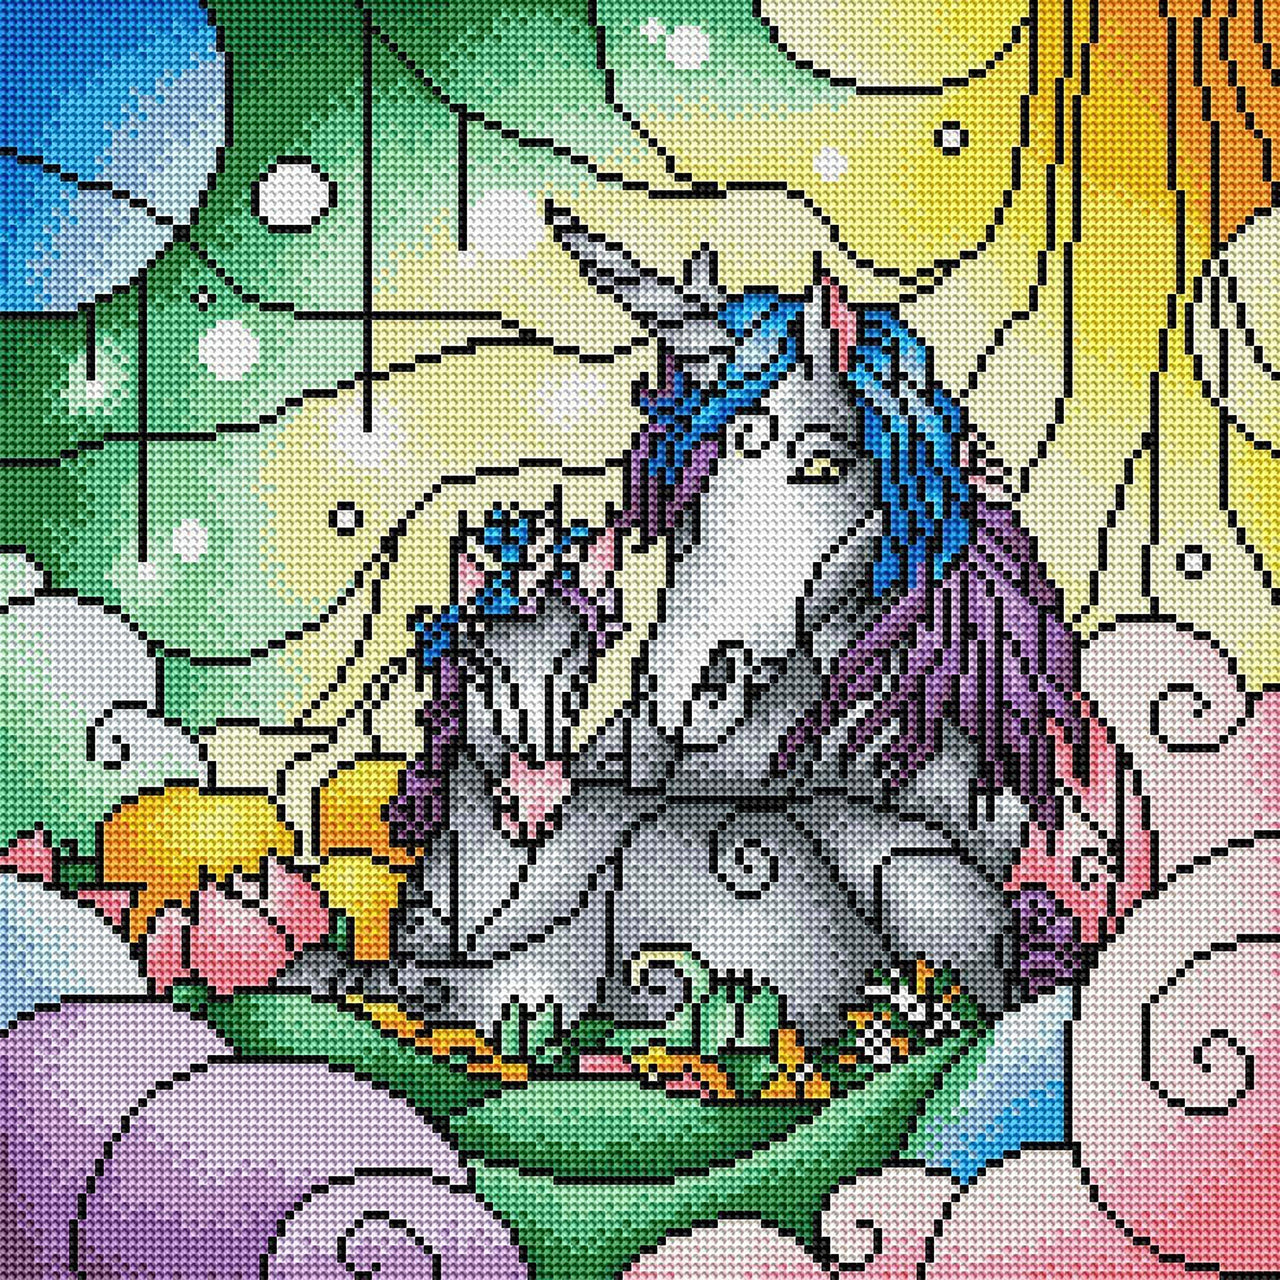 Diamond Painting Magical Mama 16.5" x 16.5" (42cm x 42cm) / Round With 34 Colors Including 1 AB and 1 Special Diamond / 21,877